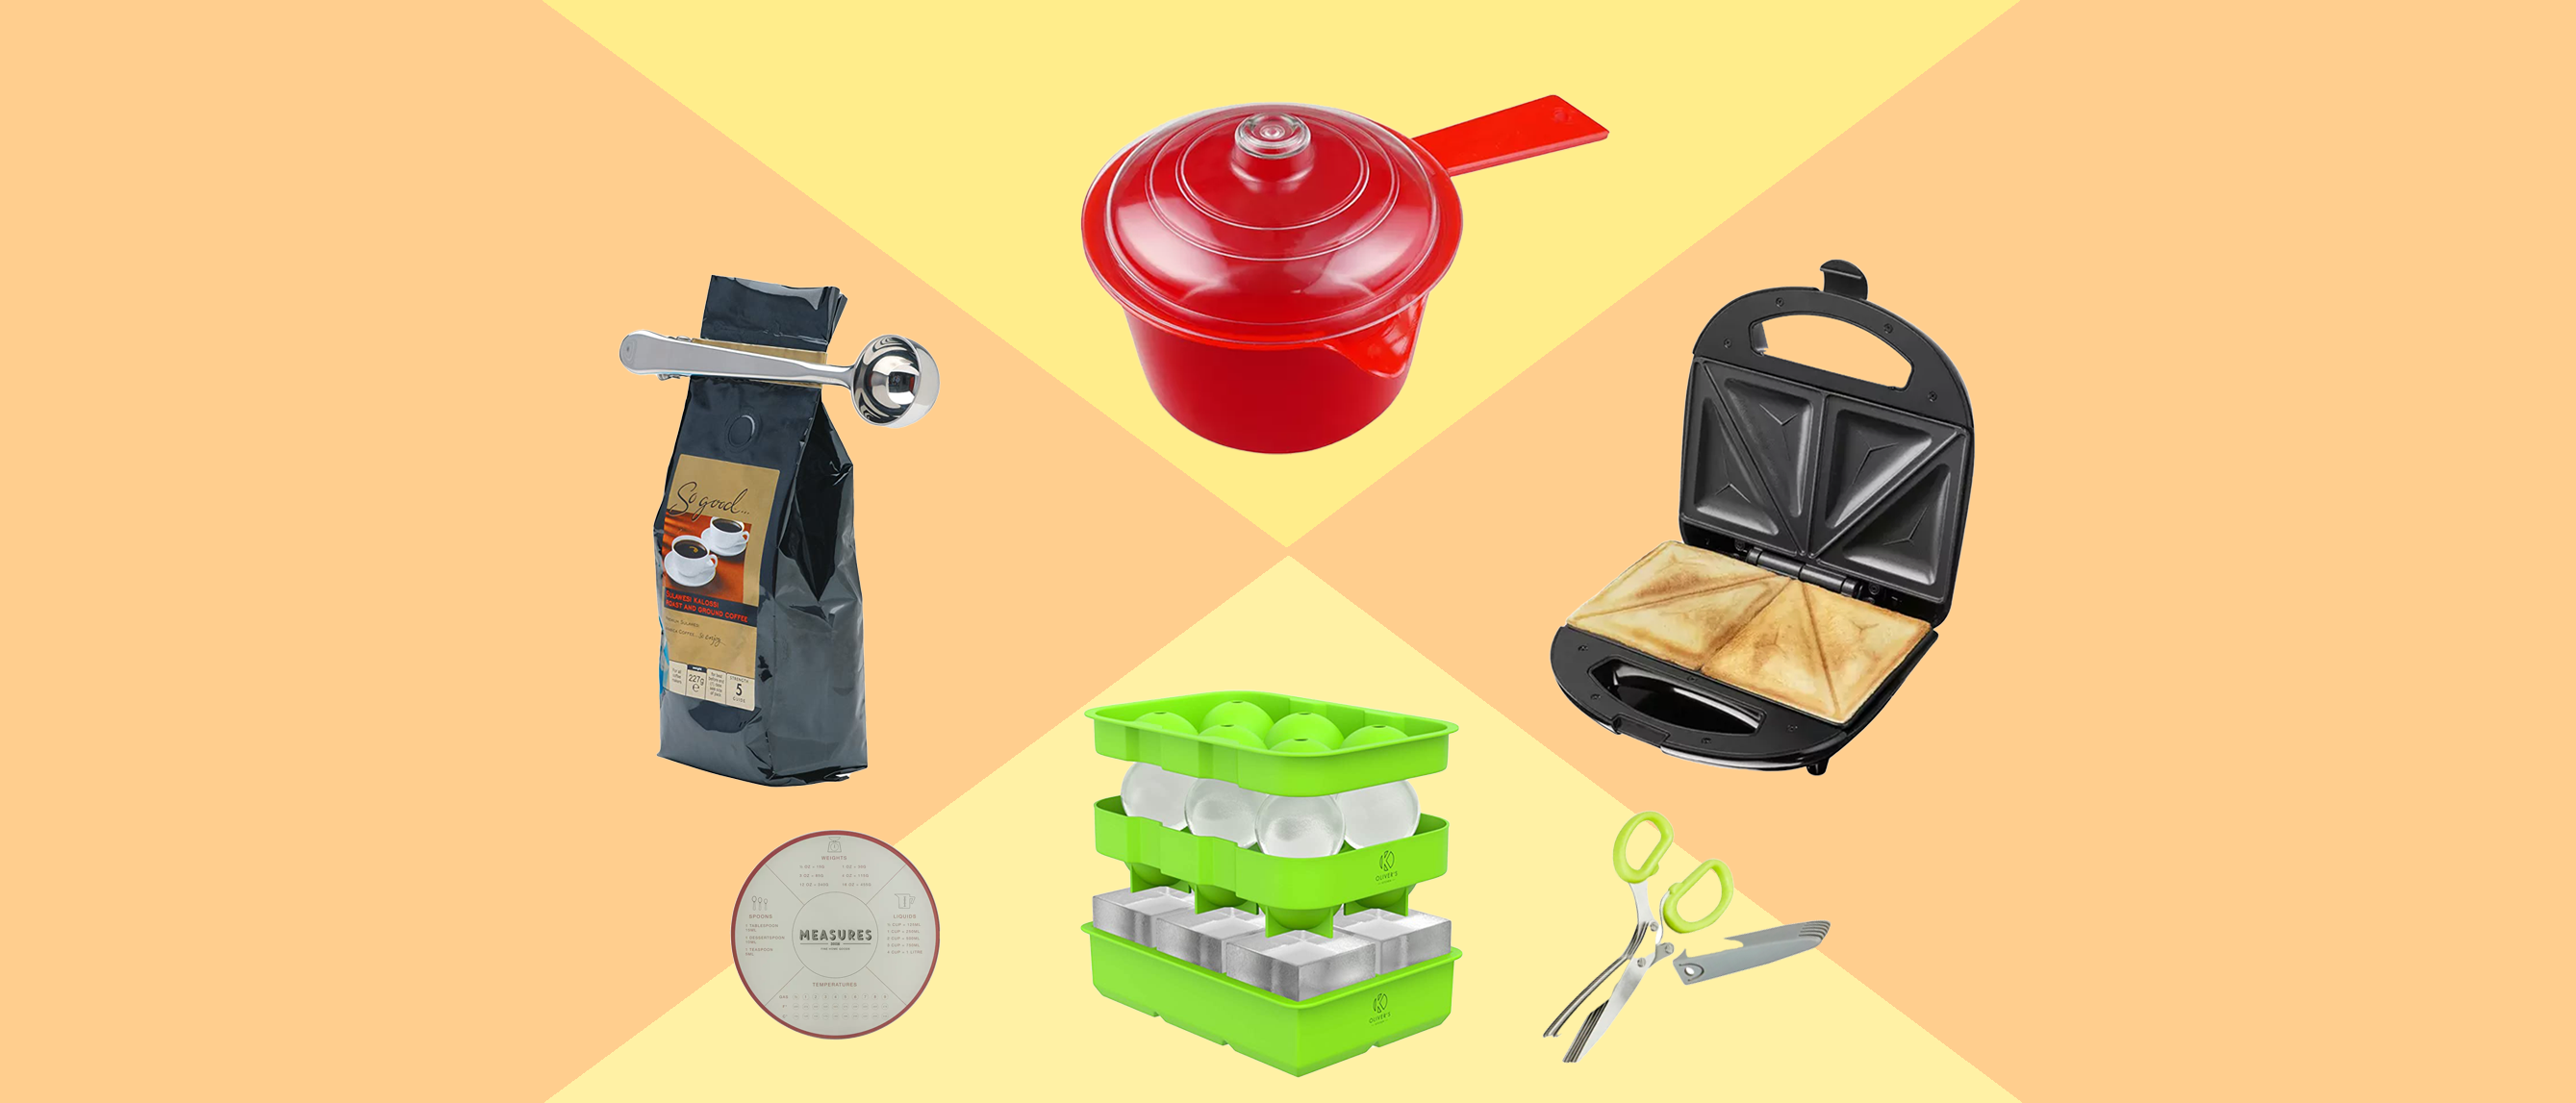 Best Kitchen Gadgets 2023 - Top 10 Must-Have Gadgets For Effortless Cooking  & Culinary Creativity! 